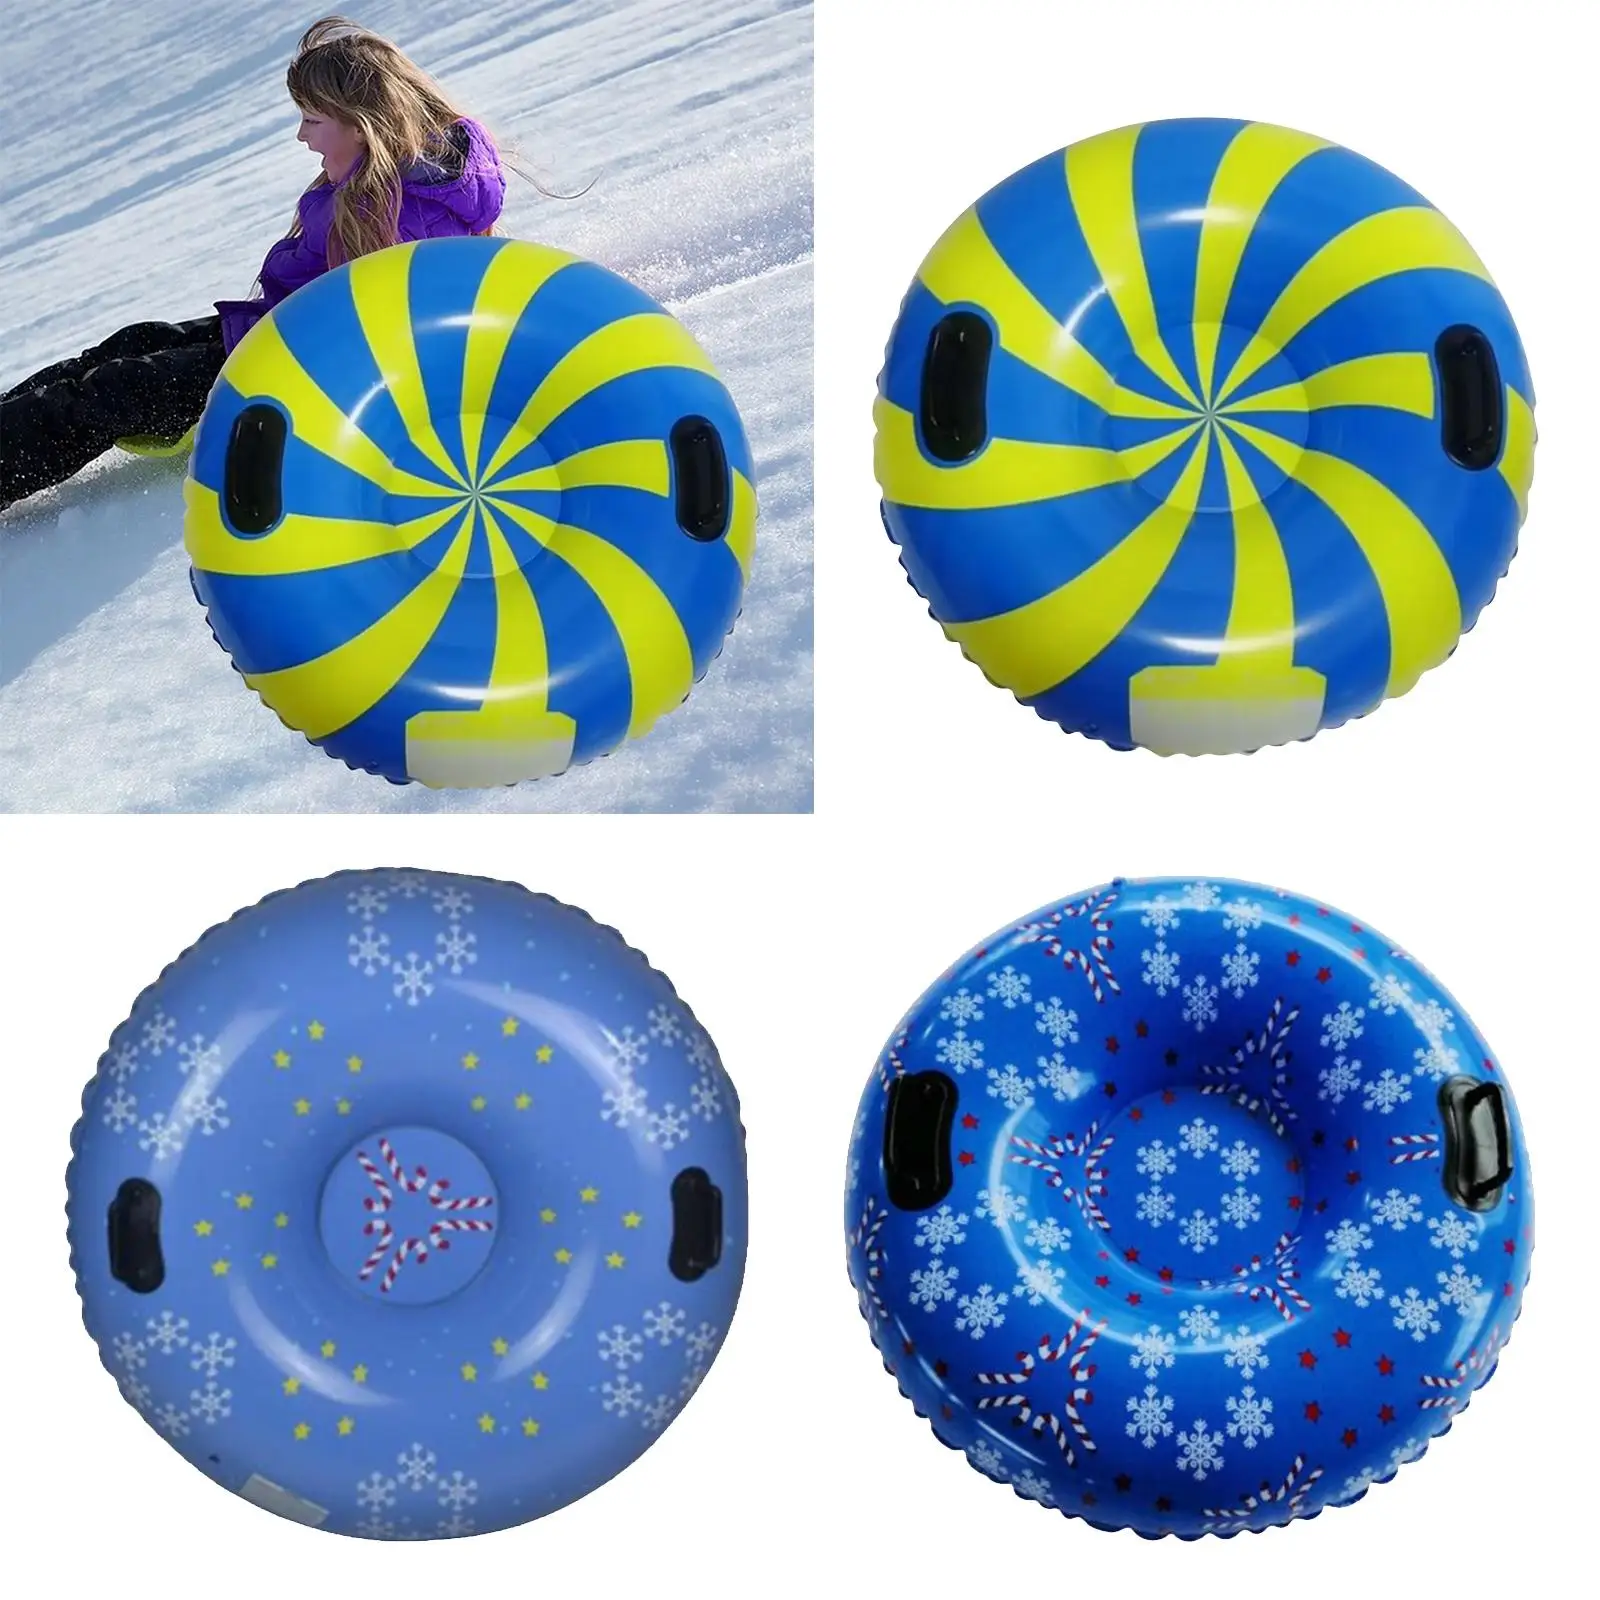 Winter snow study with inflatable sled for children and adults Sports de